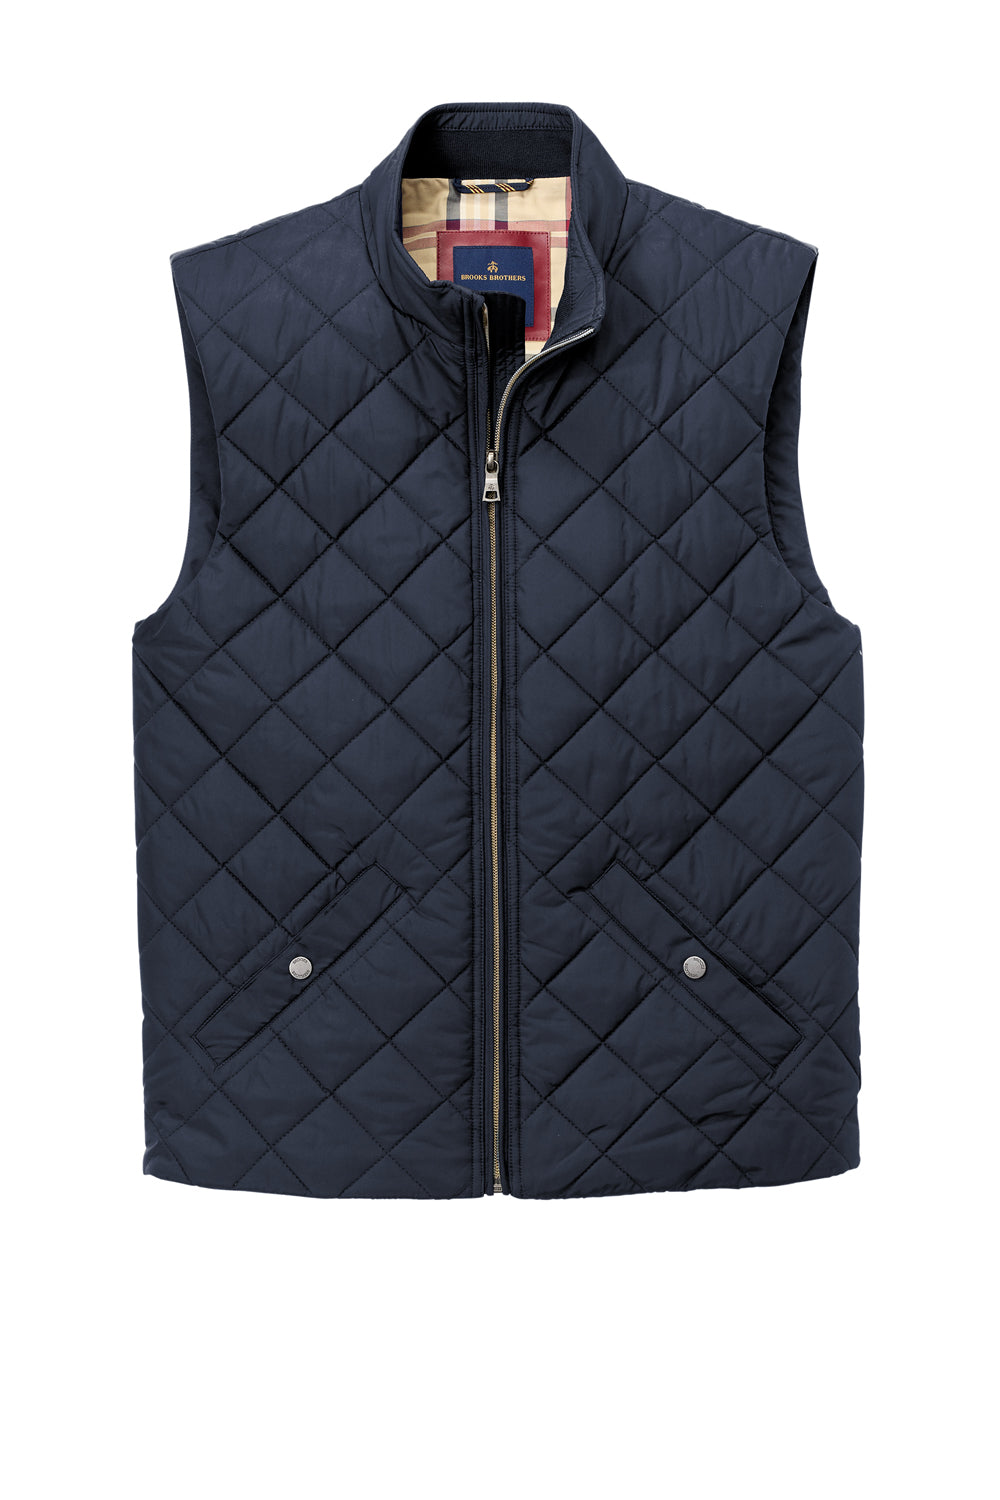 Brooks Brothers Mens Water Resistant Quilted Full Zip Vest Night Navy Blue Flat Front